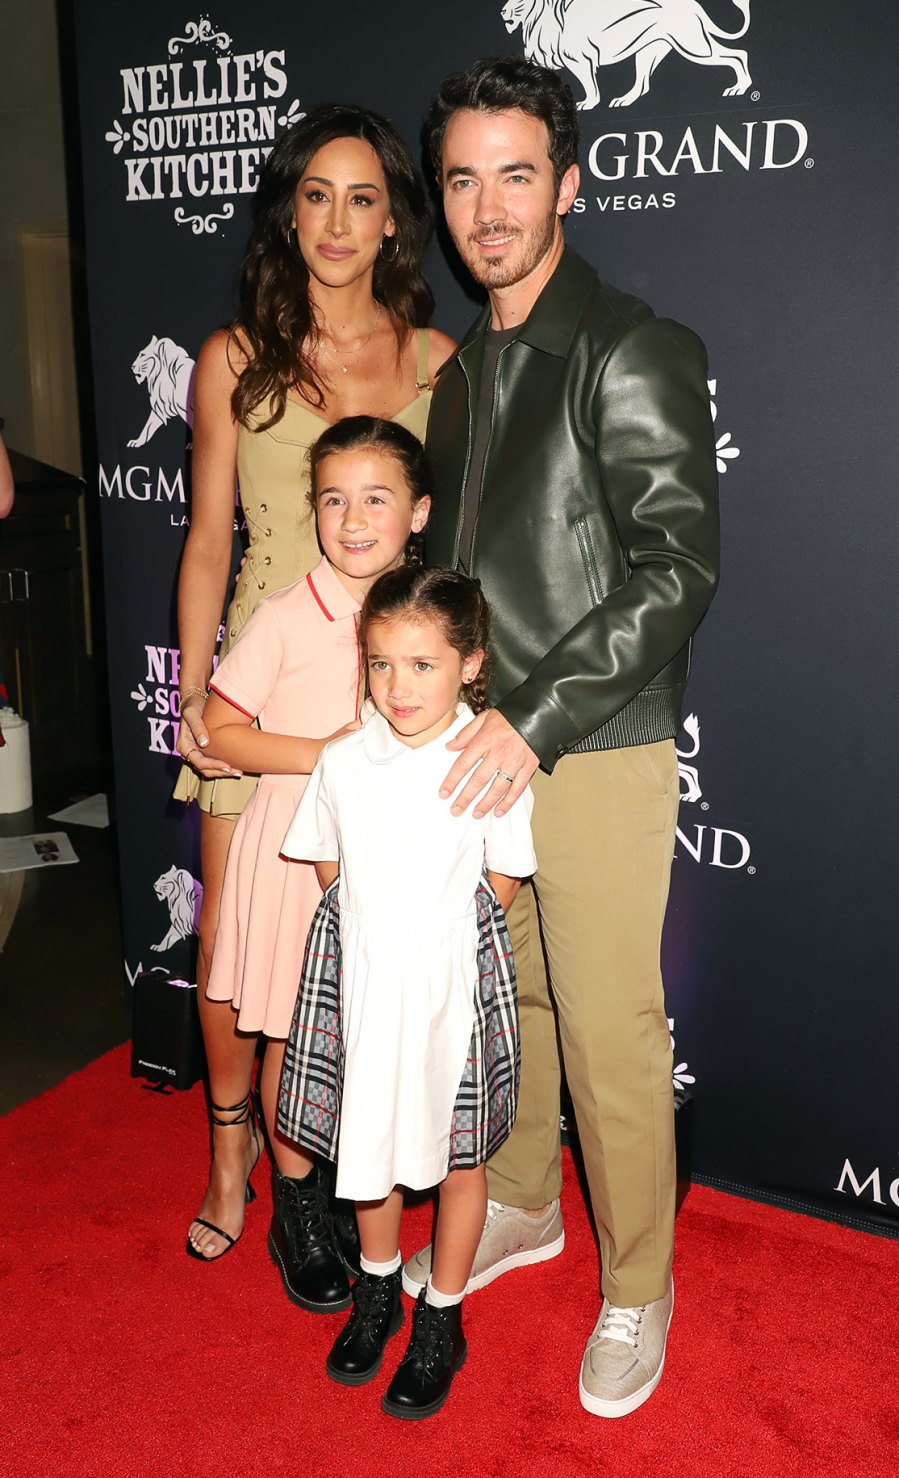 Kevin Jonas and Danielle Jonas’ Sweetest Family Moments With Daughters Alena and Valentina- Pics 226 Jonas Family hosts Nellie's Southern Kitchen grand opening, MGM Grand Hotel and Casino, Las Vegas, Nevada, USA - 04 Jun 2022